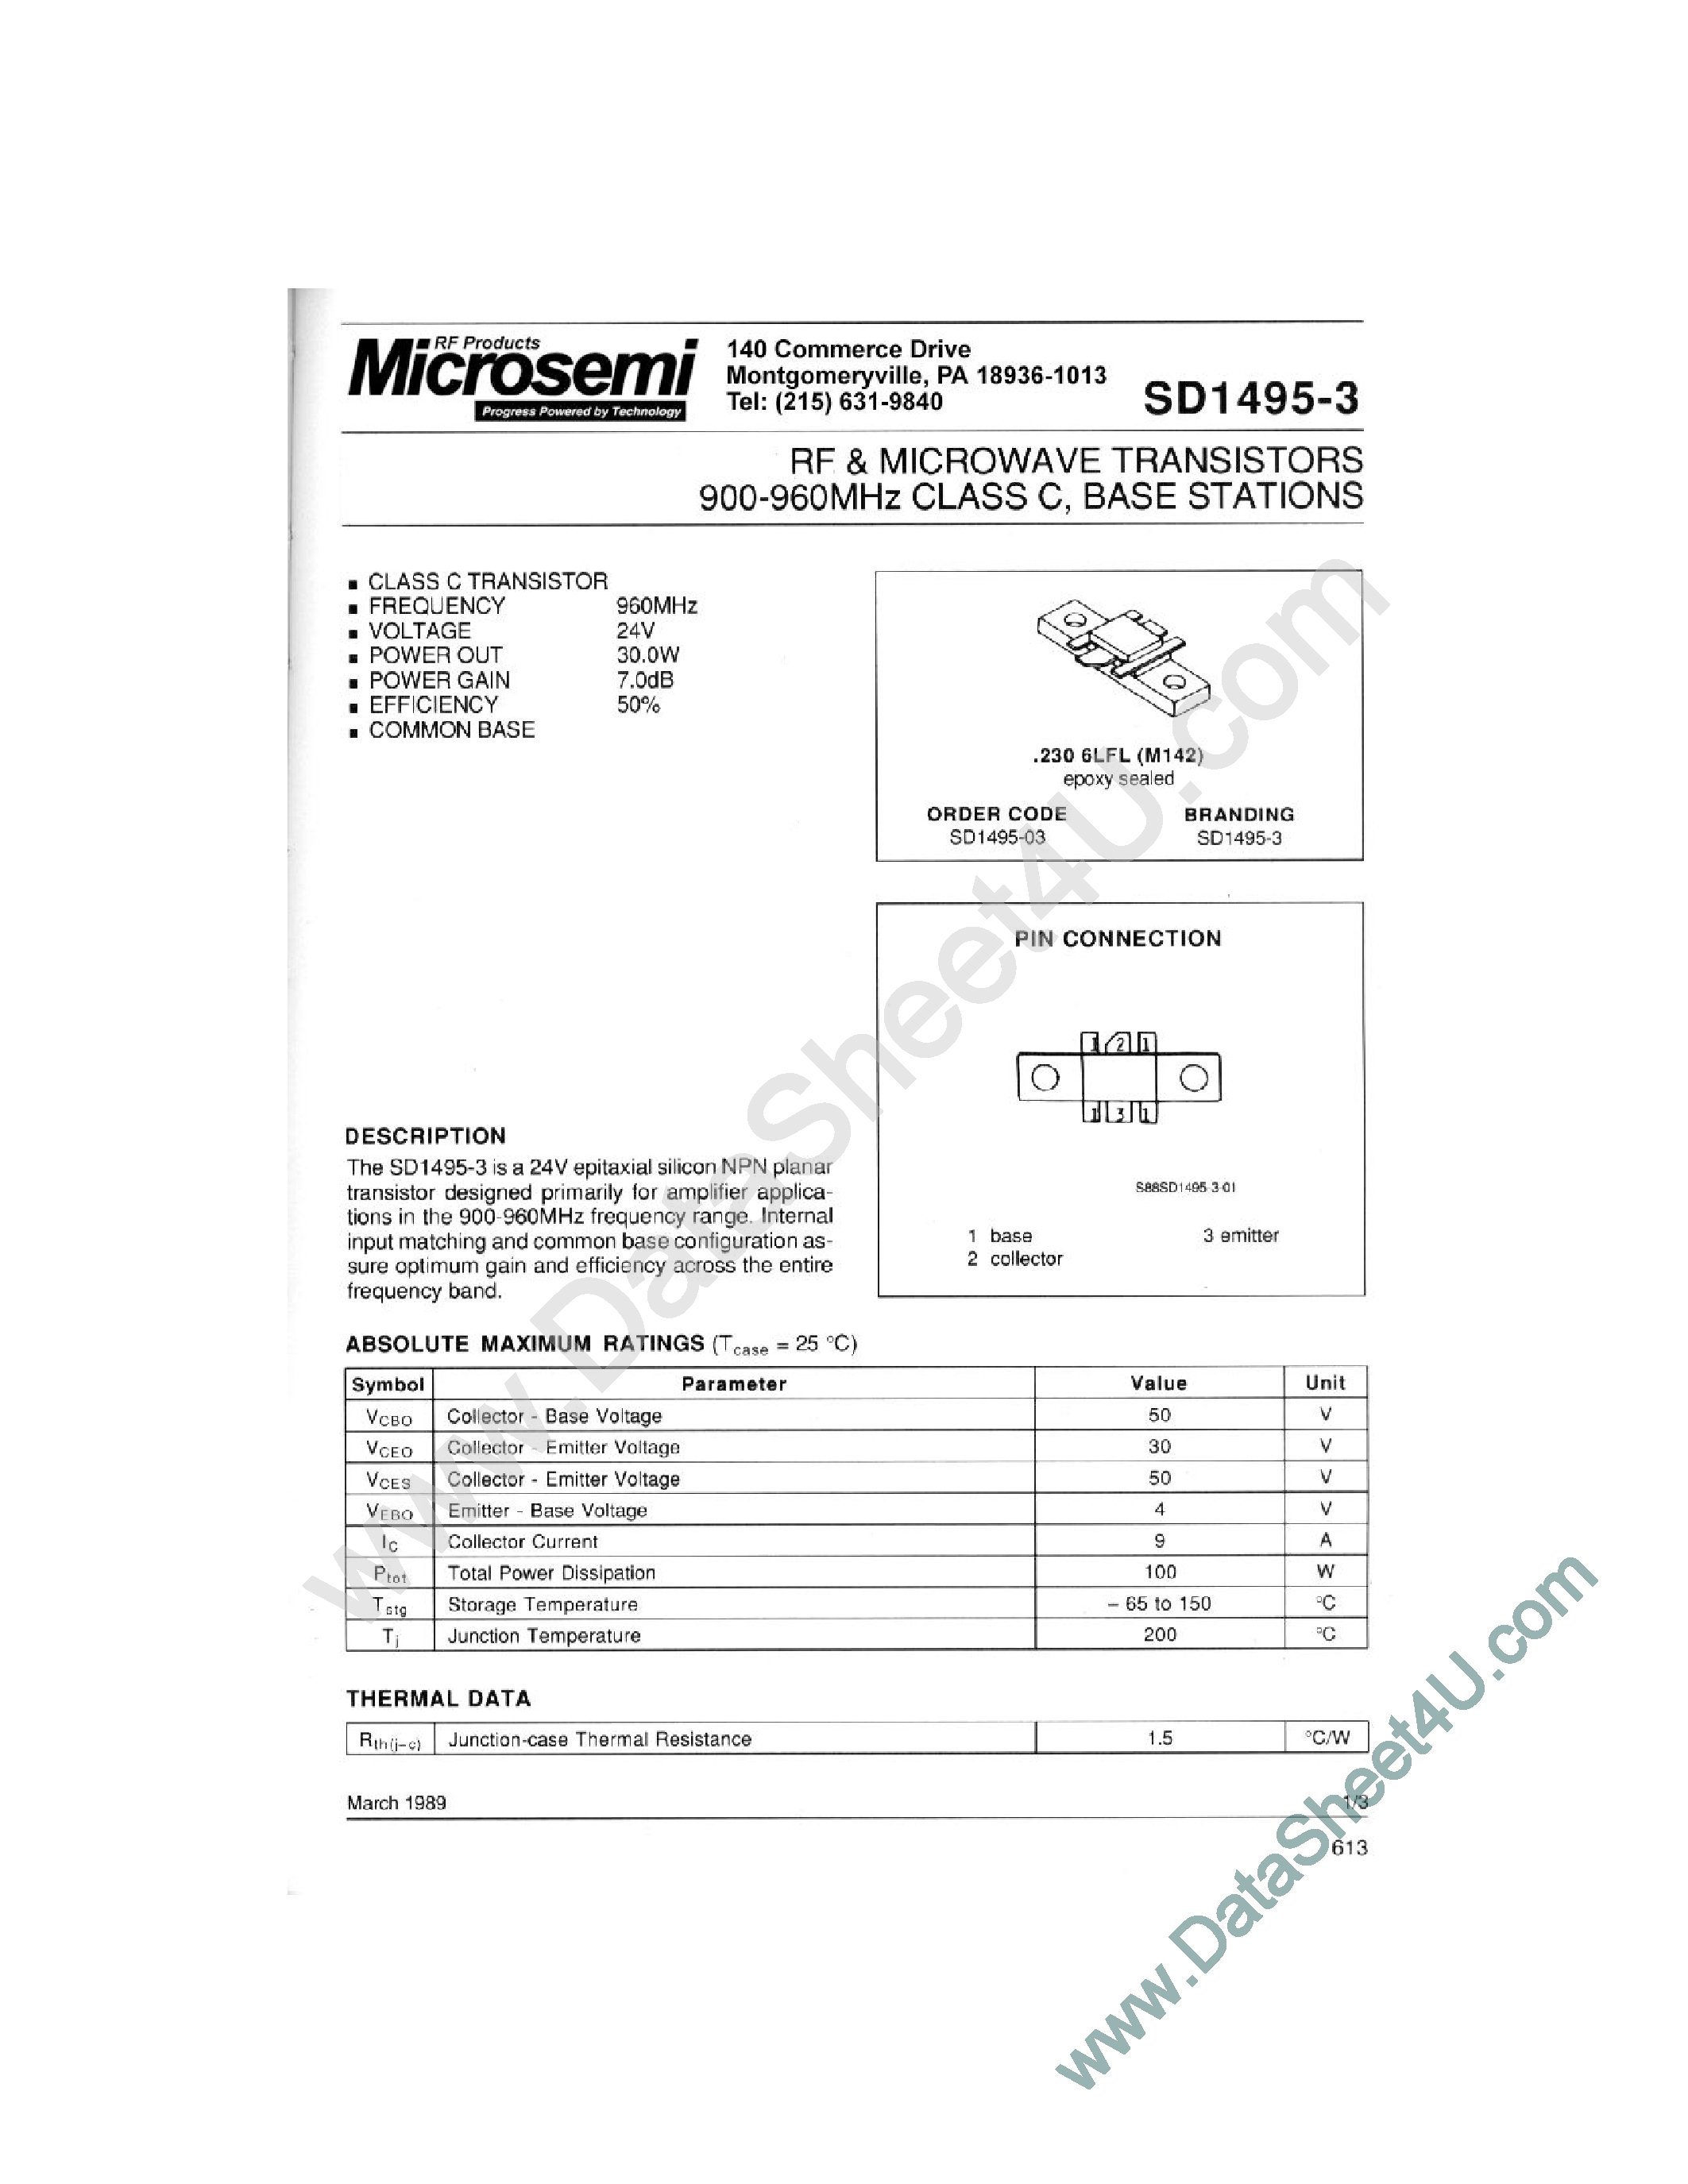 Datasheet SD1495-3 - RF & MICROWAVE TRANSISTORS 900-960 MHz CLASS C BASE STATIONS page 1